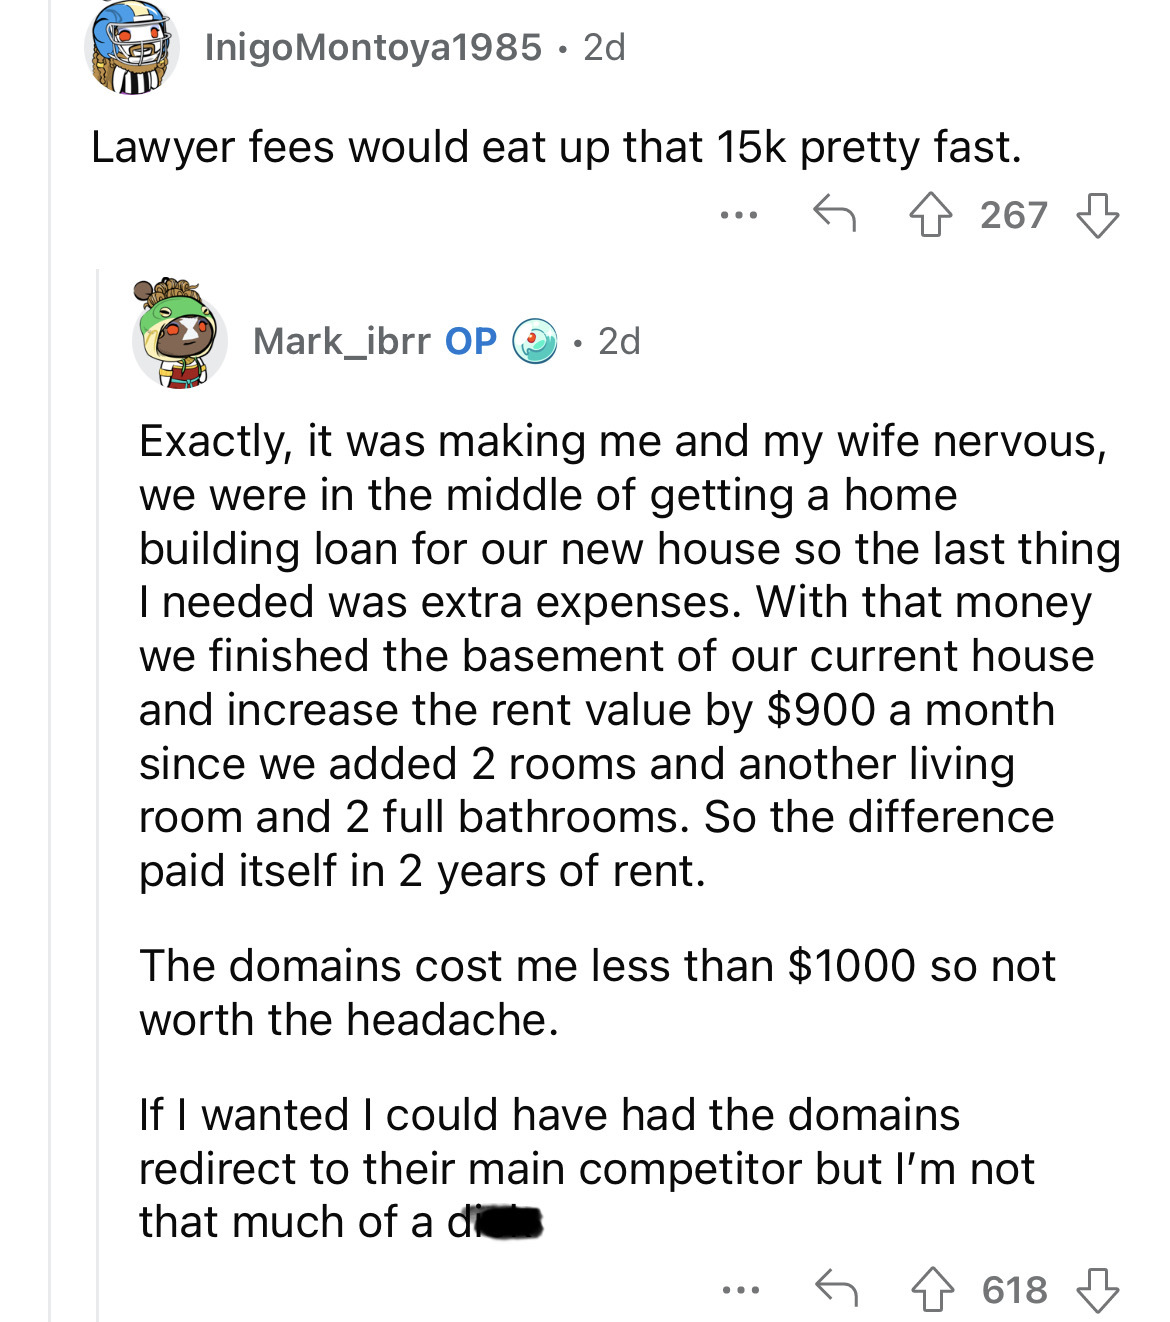 Company Refuses IT Guy's Raise – So He Buys Their Domain and Sells It To Them For $75,000